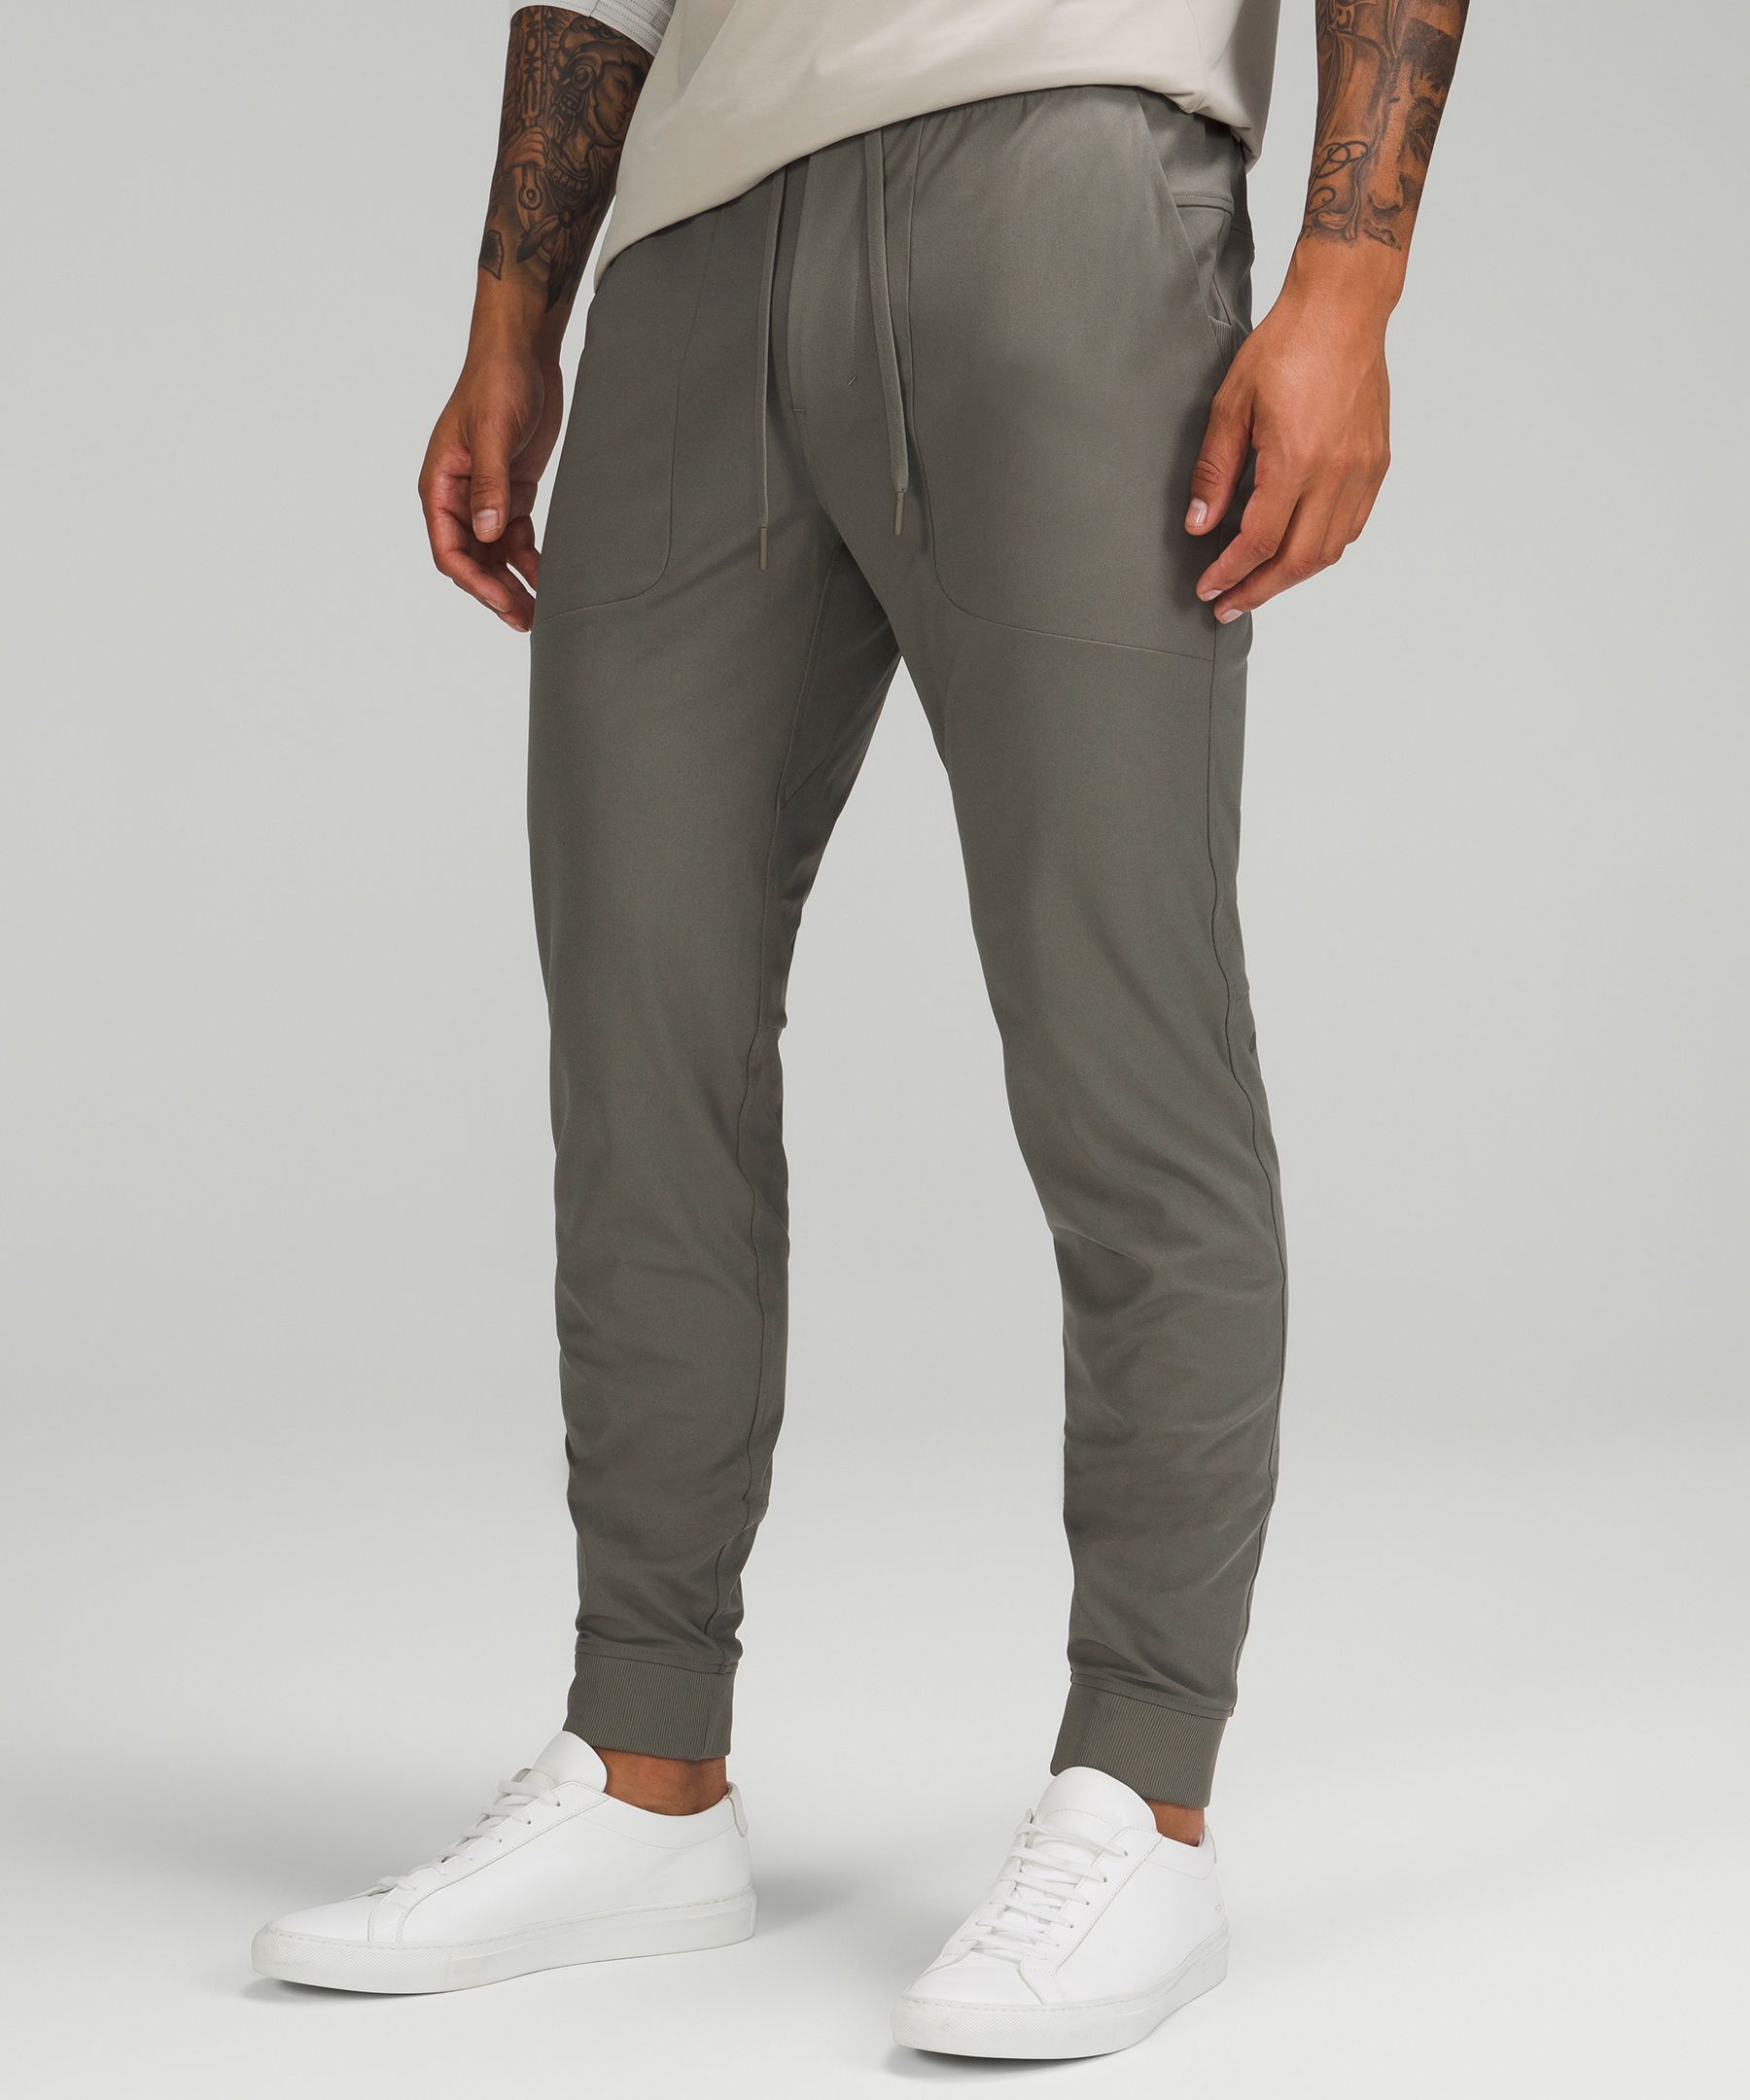 Lululemon Align Joggers Gray Size 2 - $44 (76% Off Retail) - From Jamie